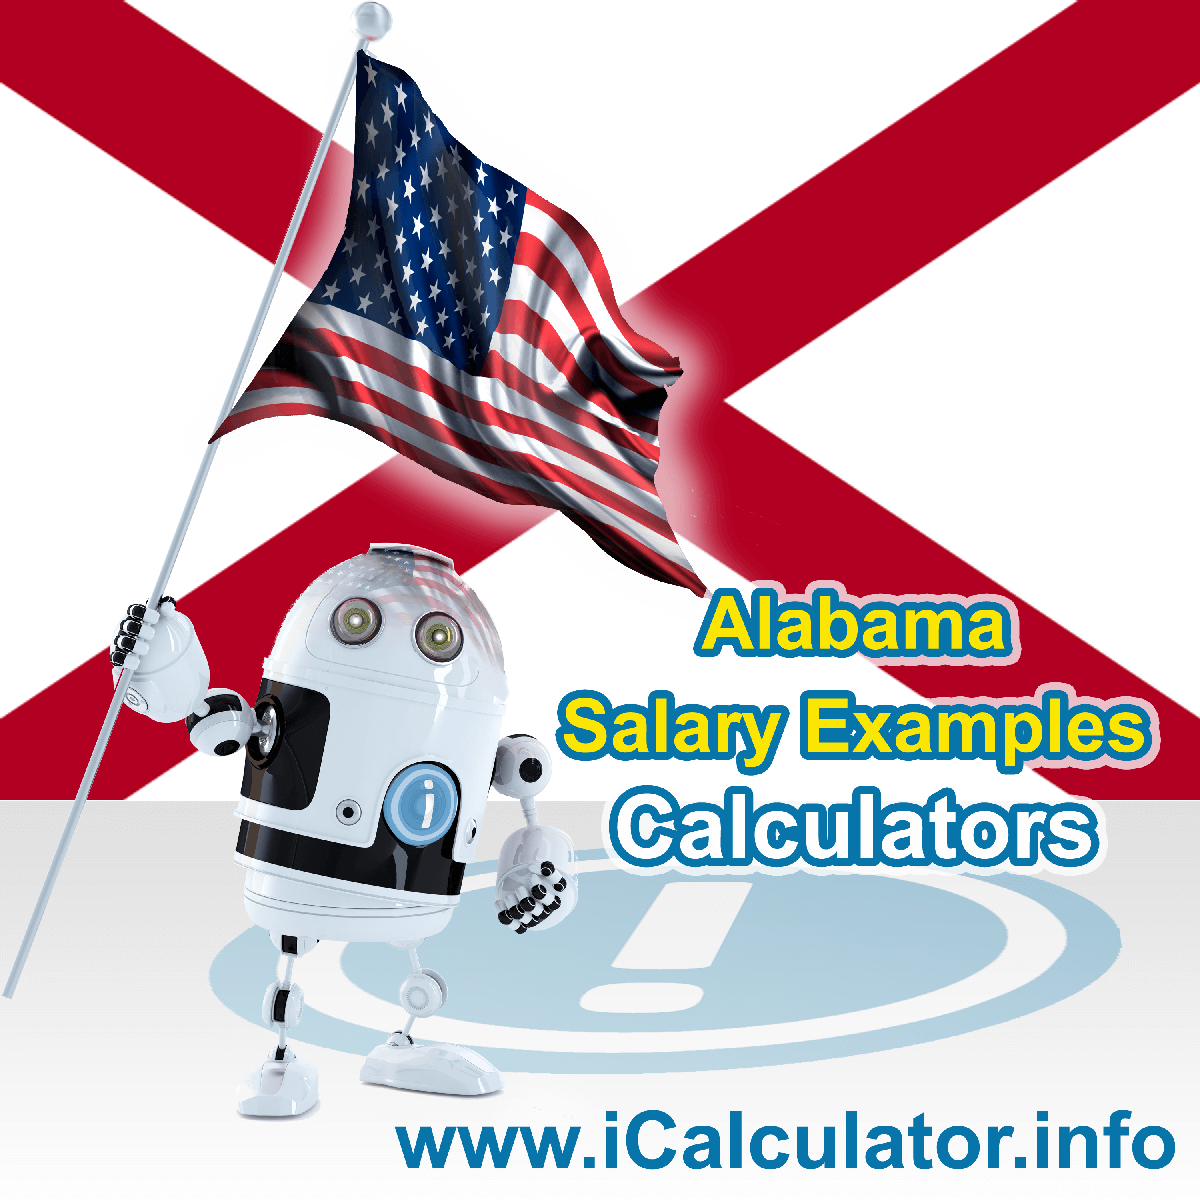 Alabama Salary Example for $ 130,000.00 in 2023 | iCalculator™ | $ 130,000.00 salary example for employee and employer paying Alabama State tincome taxes. Detailed salary after tax calculation including Alabama State Tax, Federal State Tax, Medicare Deductions, Social Security, Capital Gains and other income tax and salary deductions complete with supporting Alabama state tax tables 